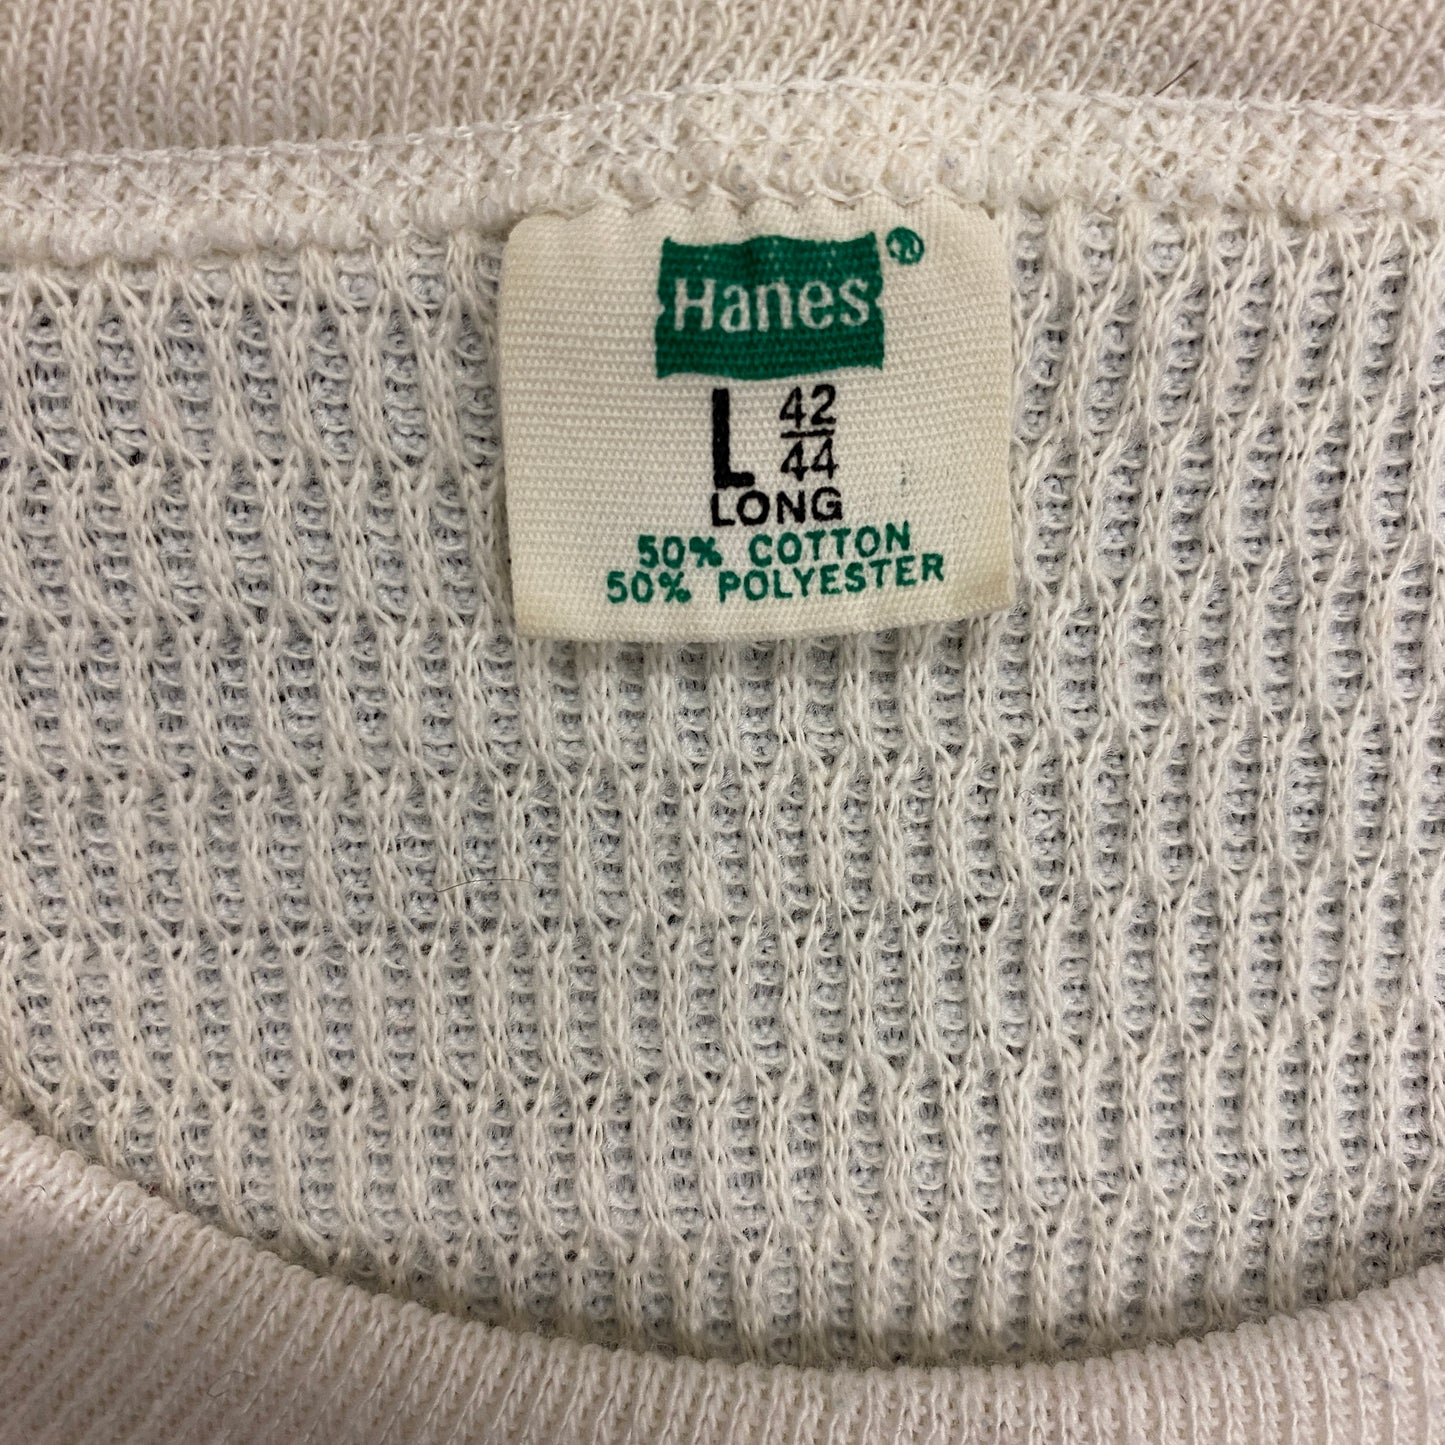 1970s Hanes Waffle Knit Thermal Shirt - Size Large